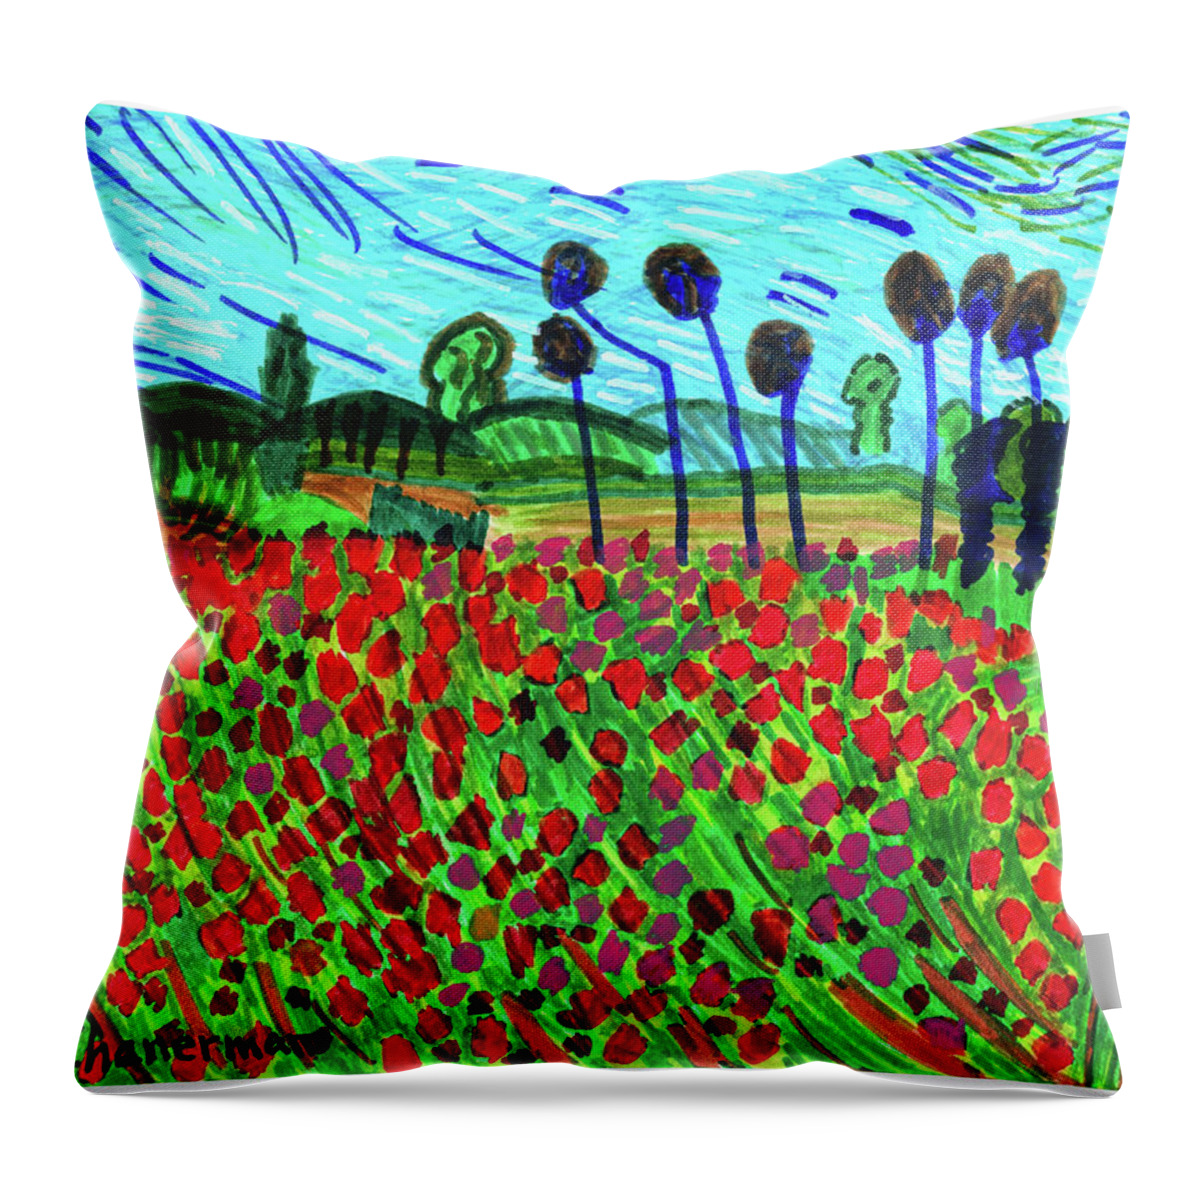 Original Drawing/painting Throw Pillow featuring the drawing Ode To Van Gogh by Susan Schanerman